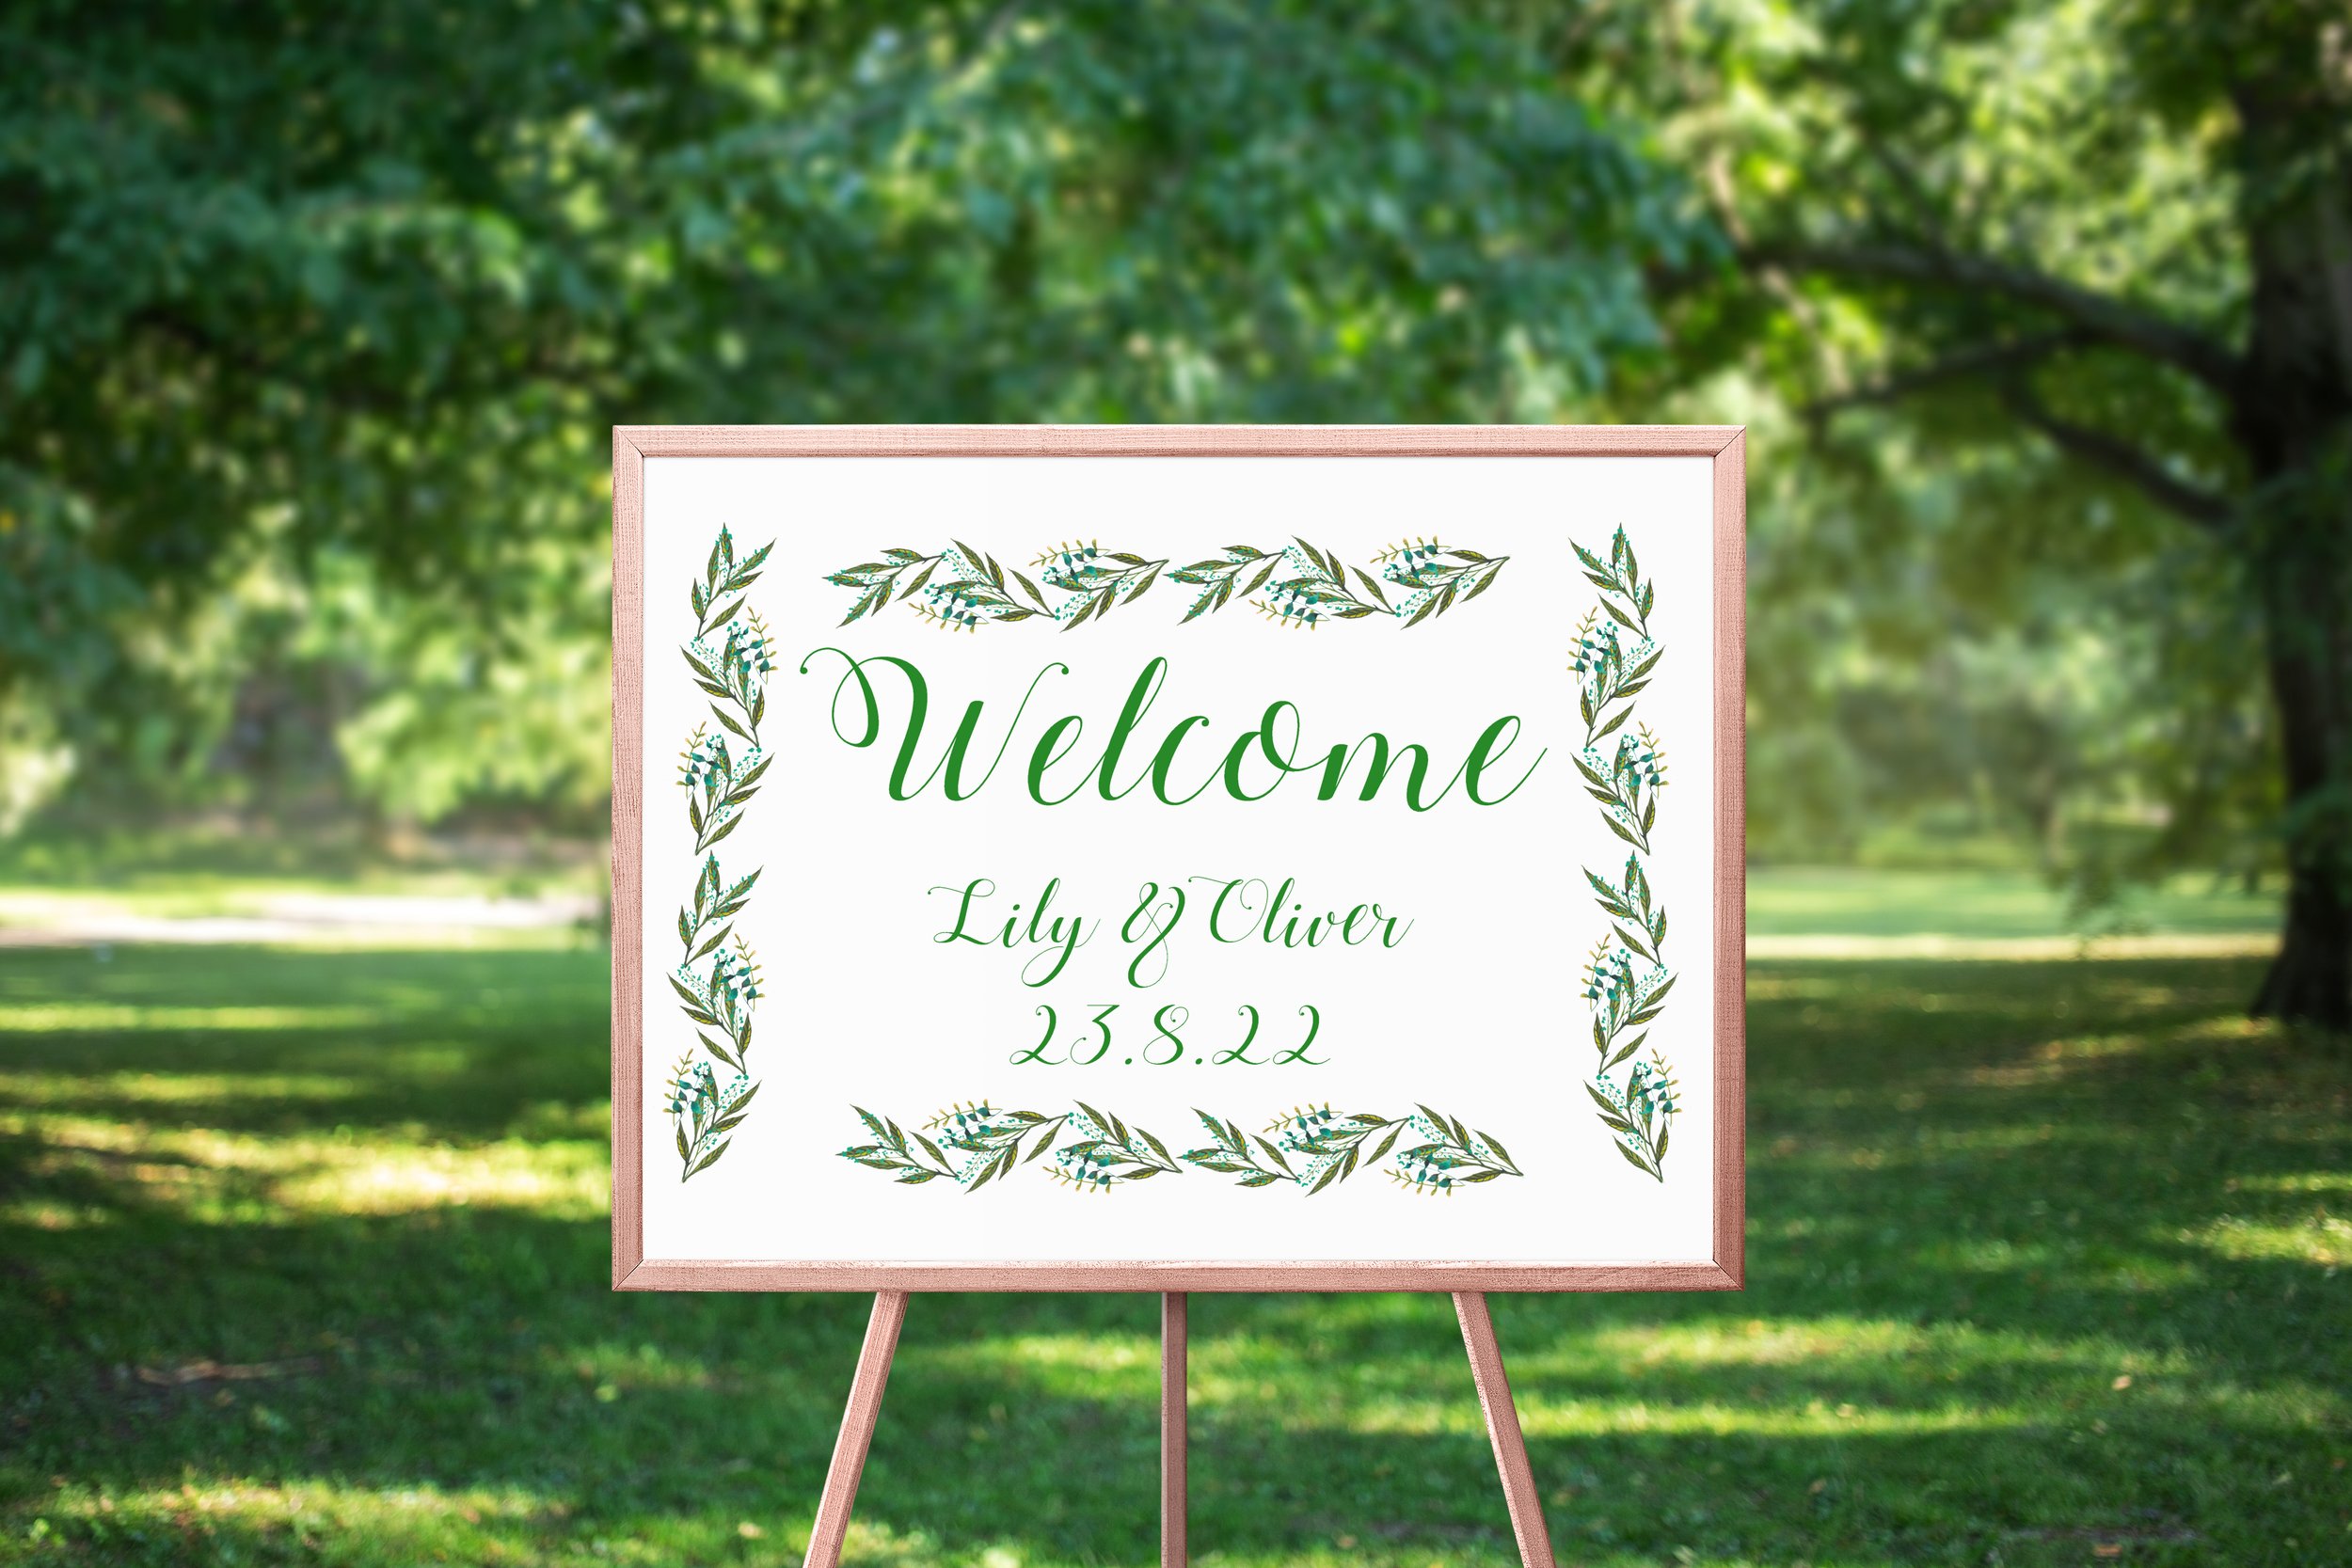 welcome sign image.jpg